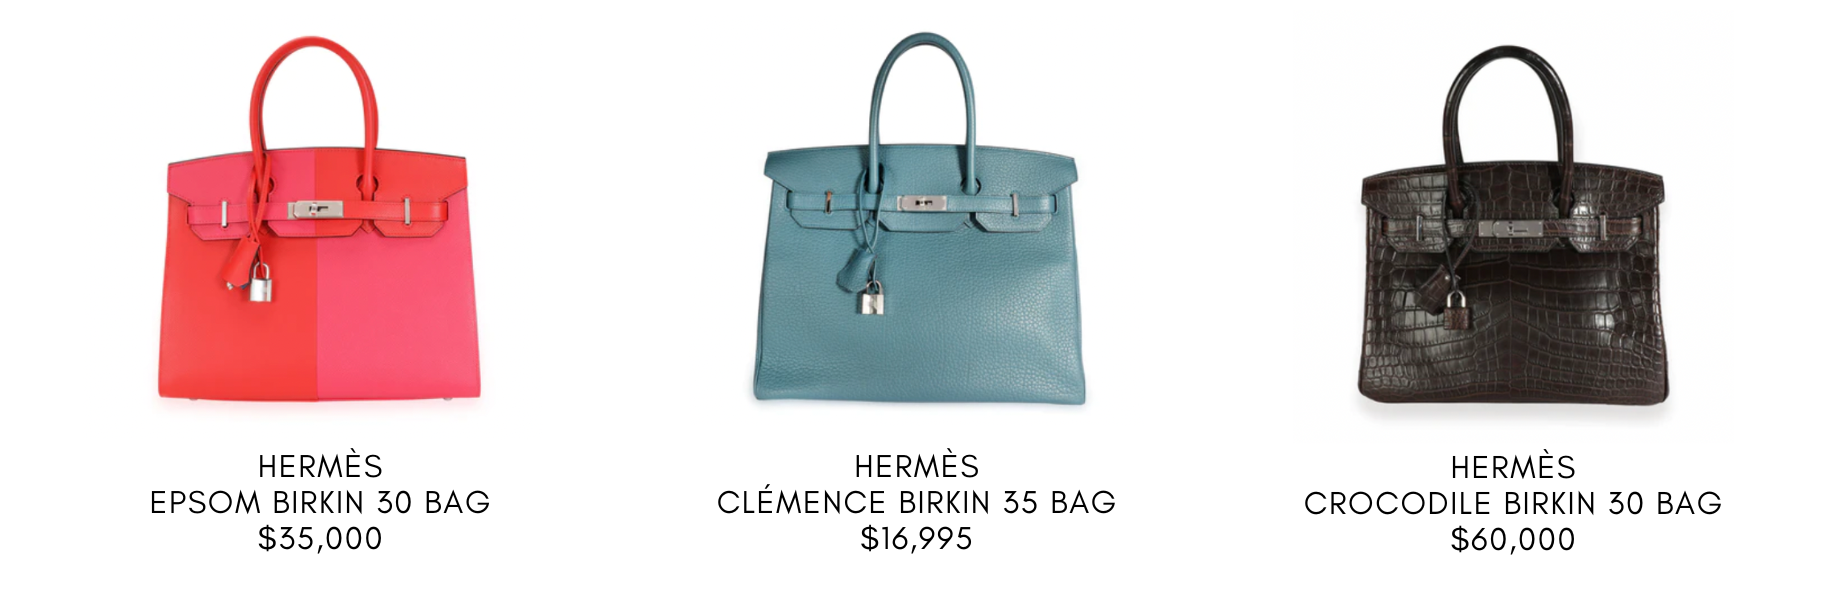 What Is The Most Popular Size Hermes Birkin Bag